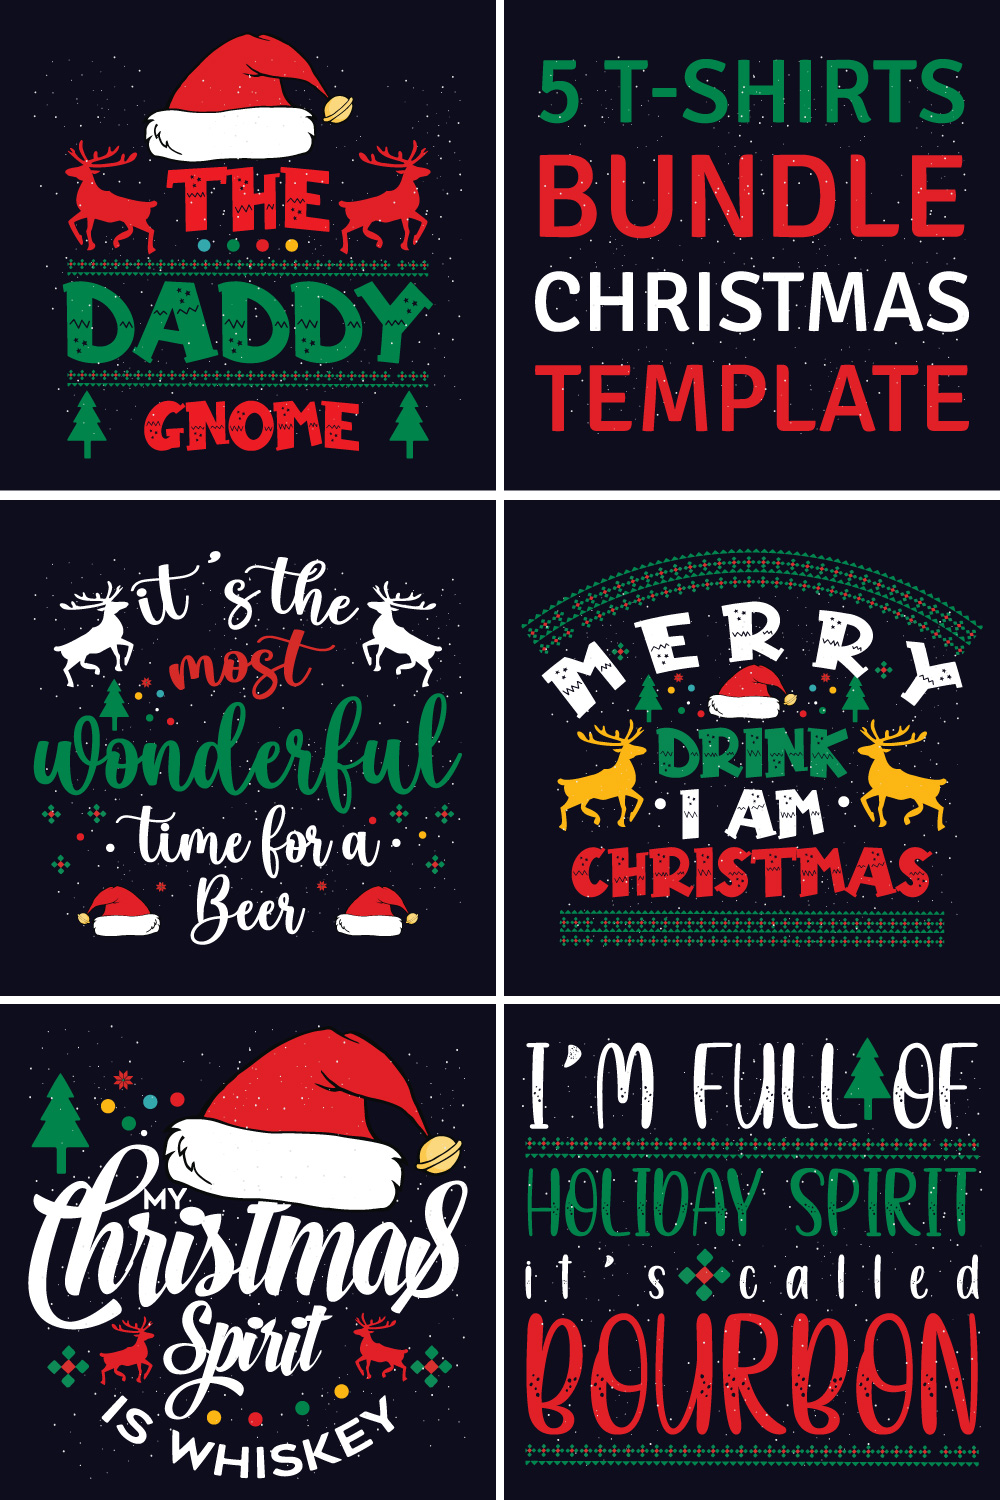 A pack of charming images for prints on a Christmas theme.